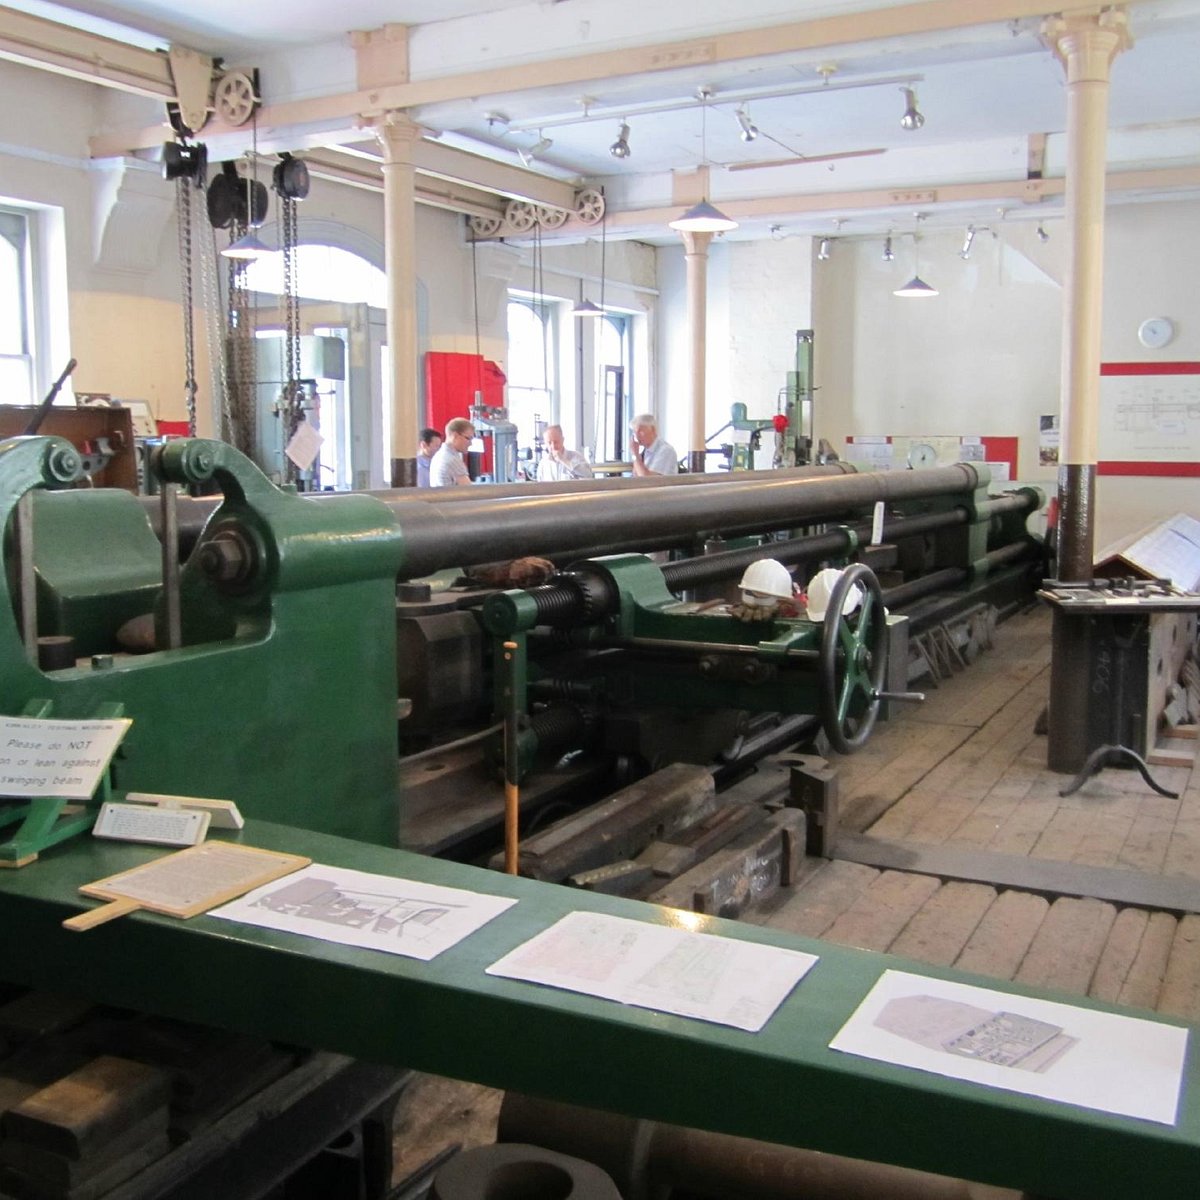 The Kirkaldy Testing Museum